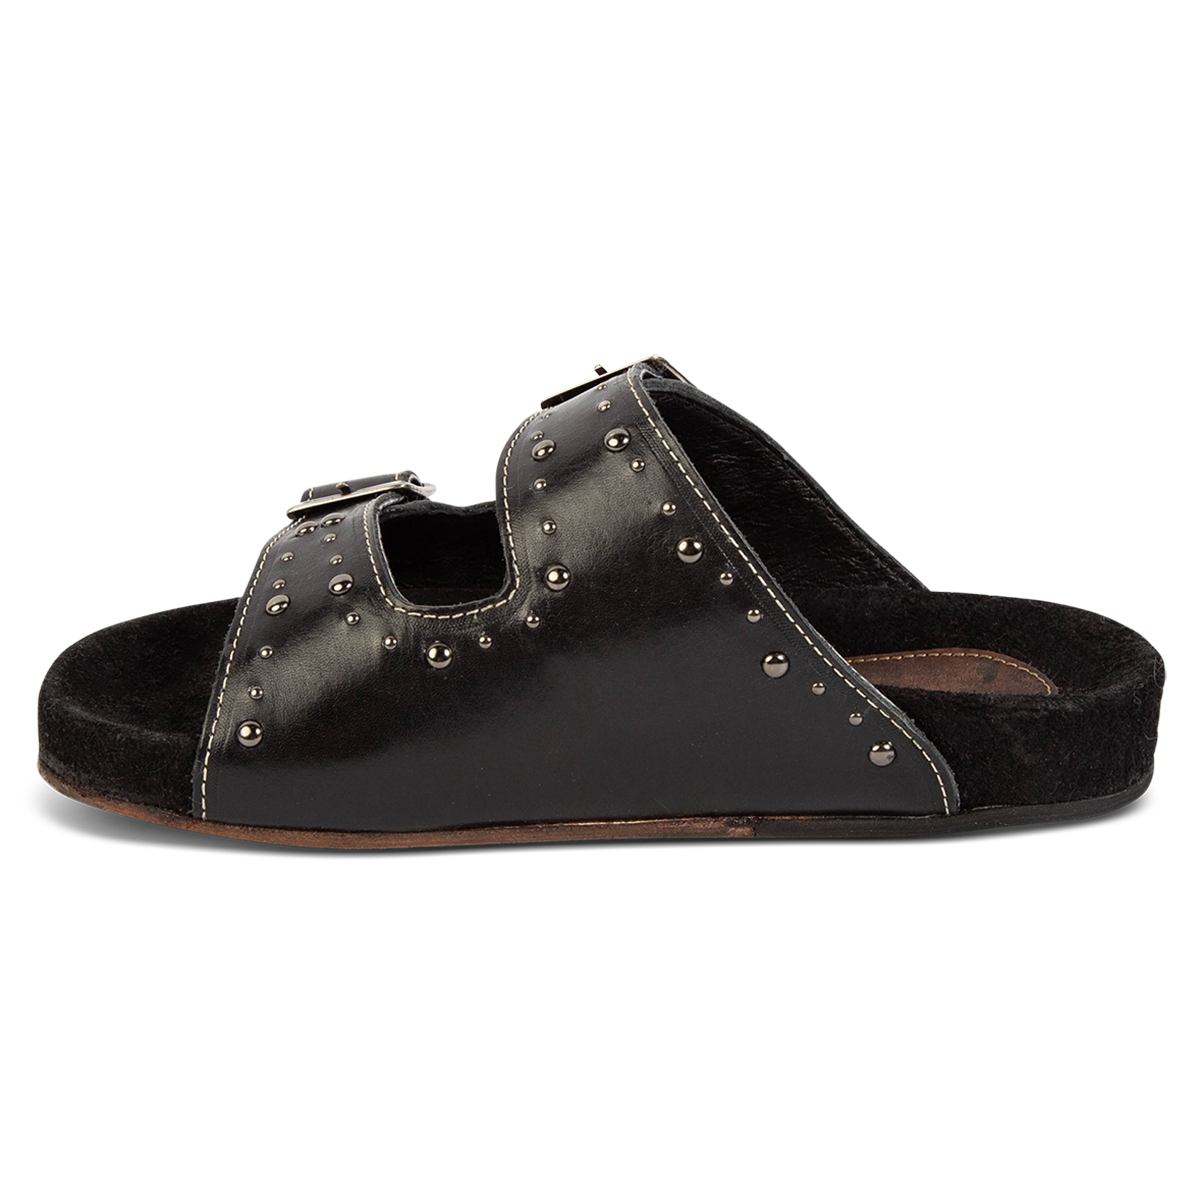 Inside view showing FREEBIRD women's Asher black sandal with adjustable belt buckles, a suede footbed and silver embellishments